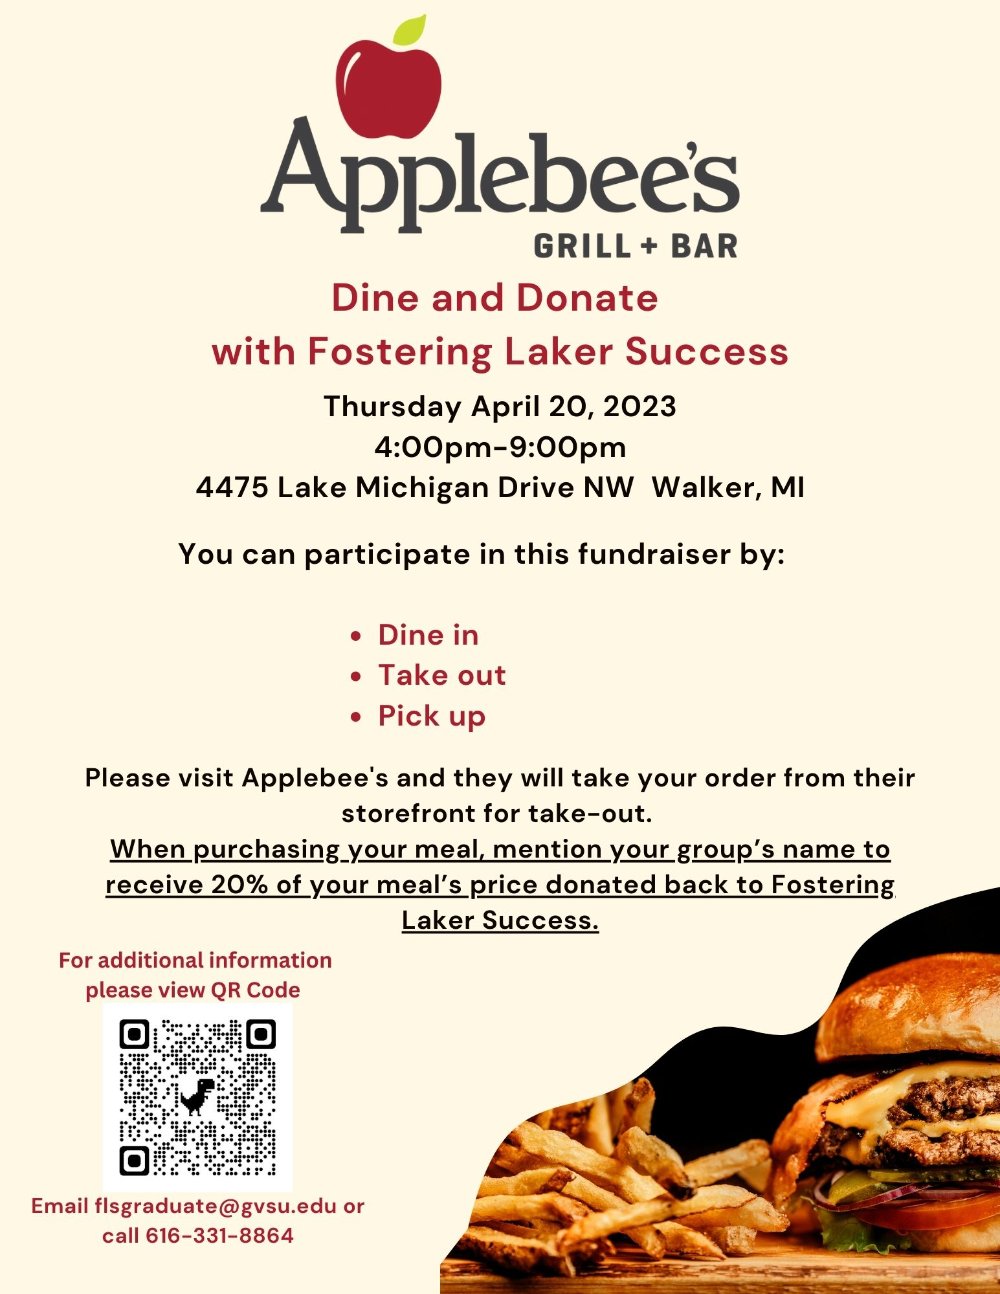 Dine and Donate with Fostering Laker Success